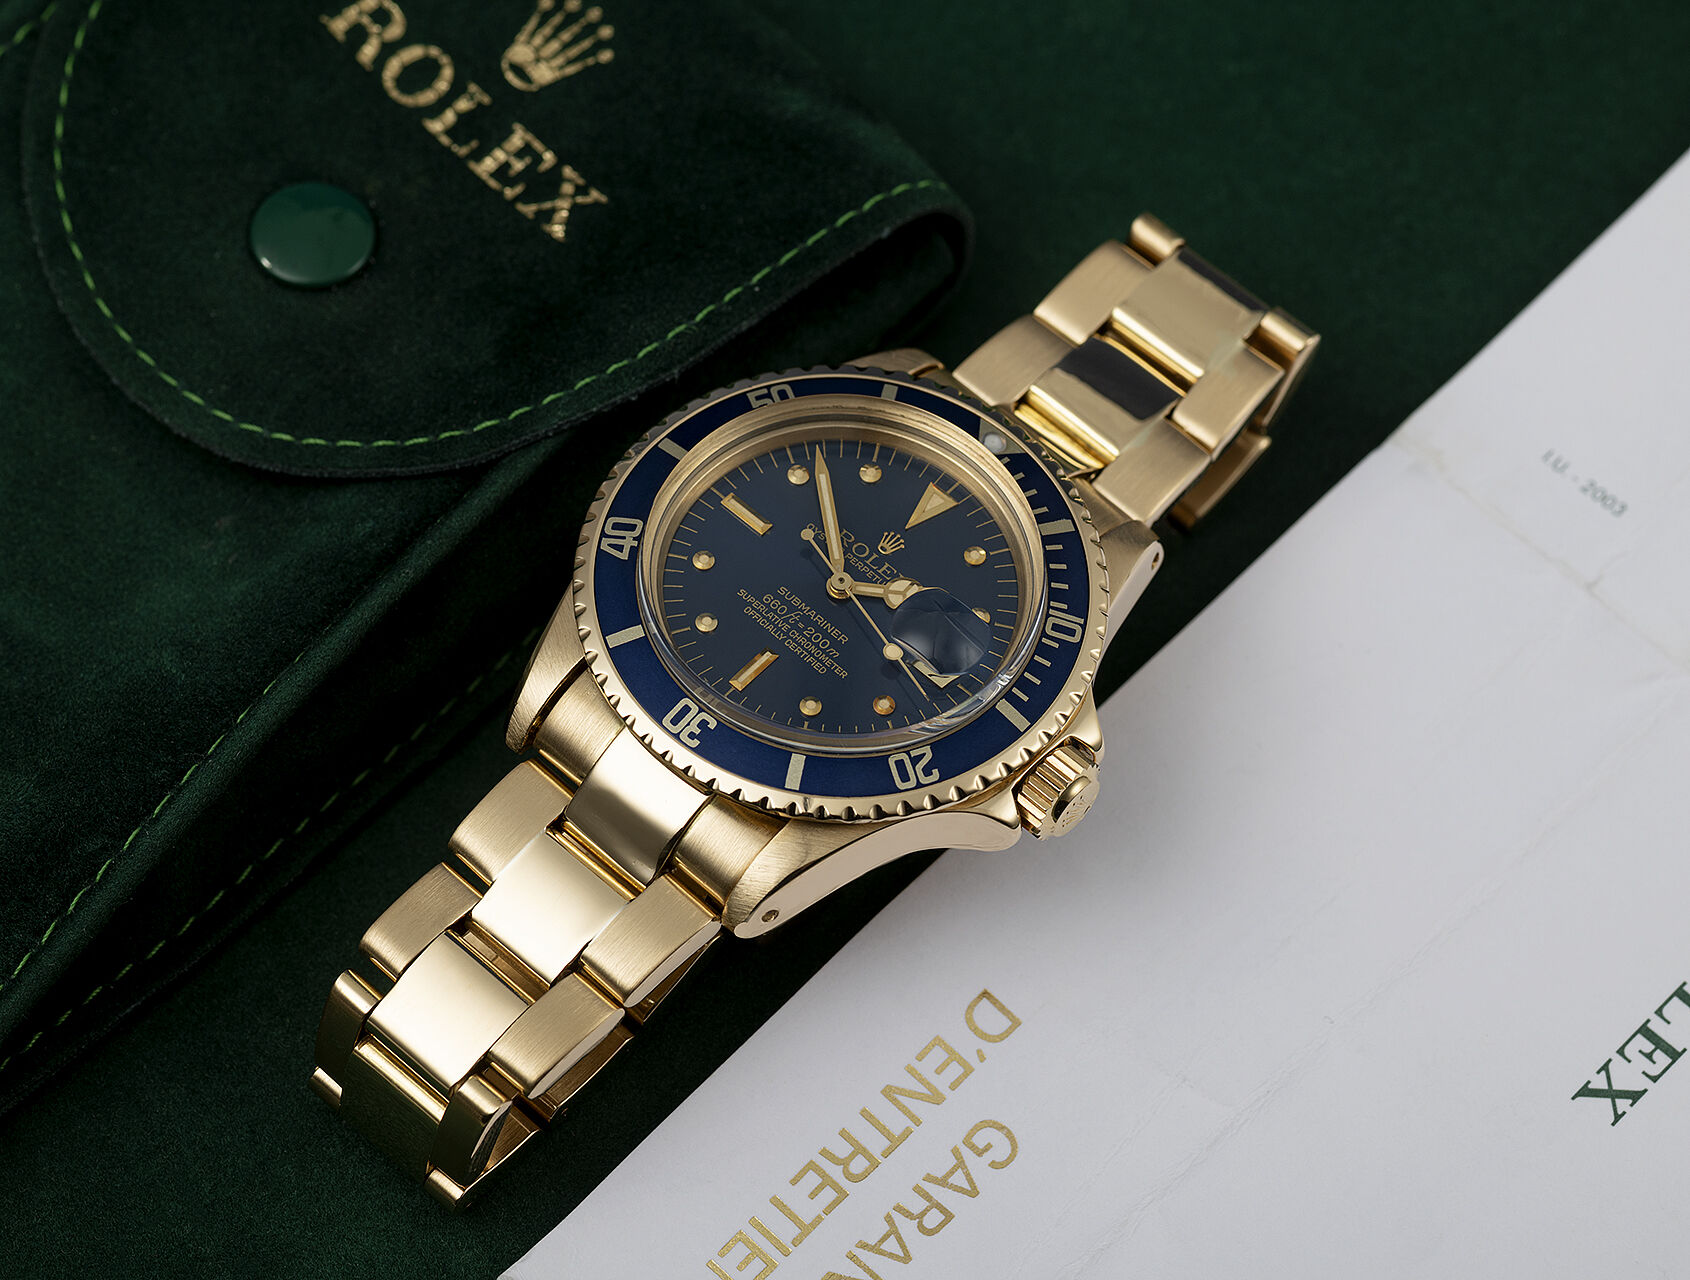 ref 16808 | Rare Early Yellow Gold Model | Rolex Submariner Date